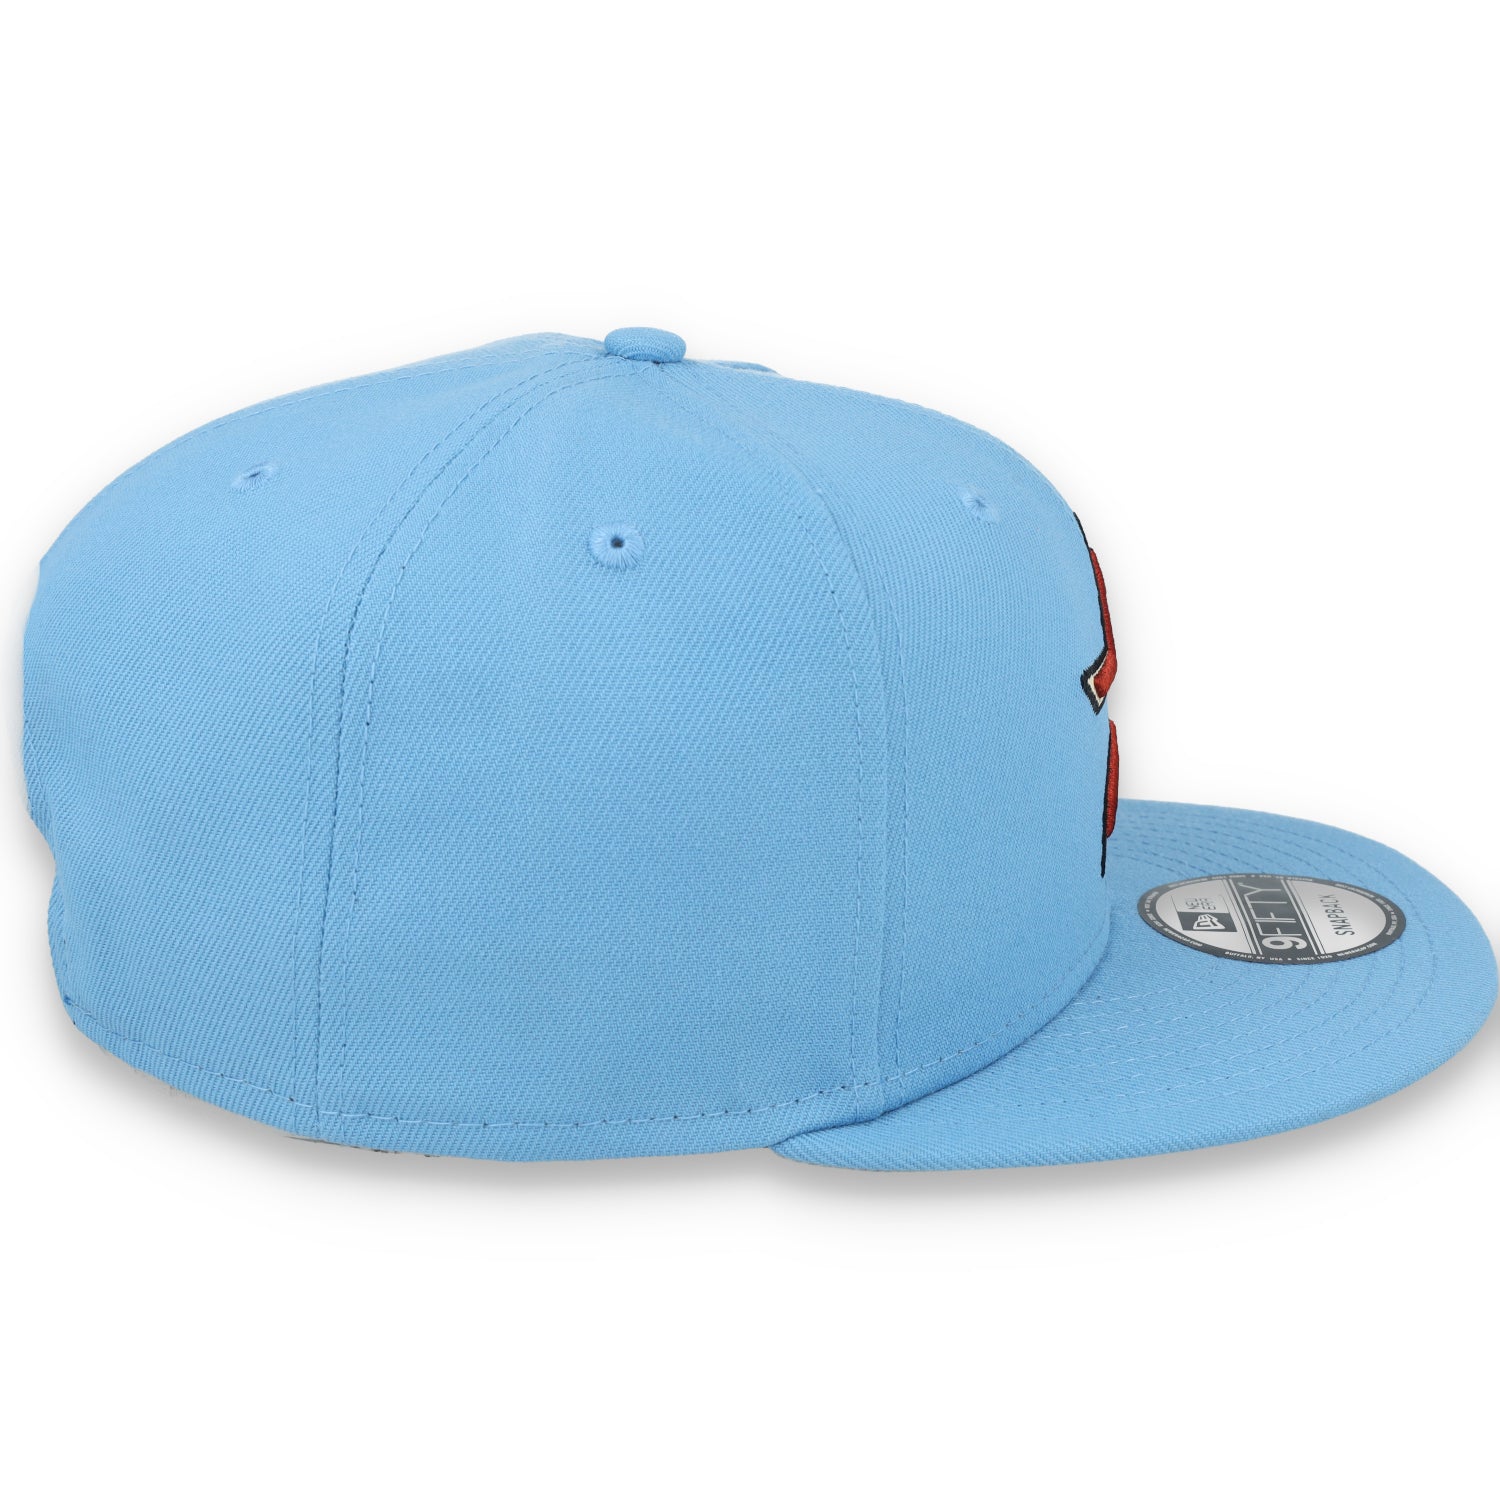 New Era HOUSTON ASTROS Cooperstown Evergreen 9FIFTY- Sky Blue